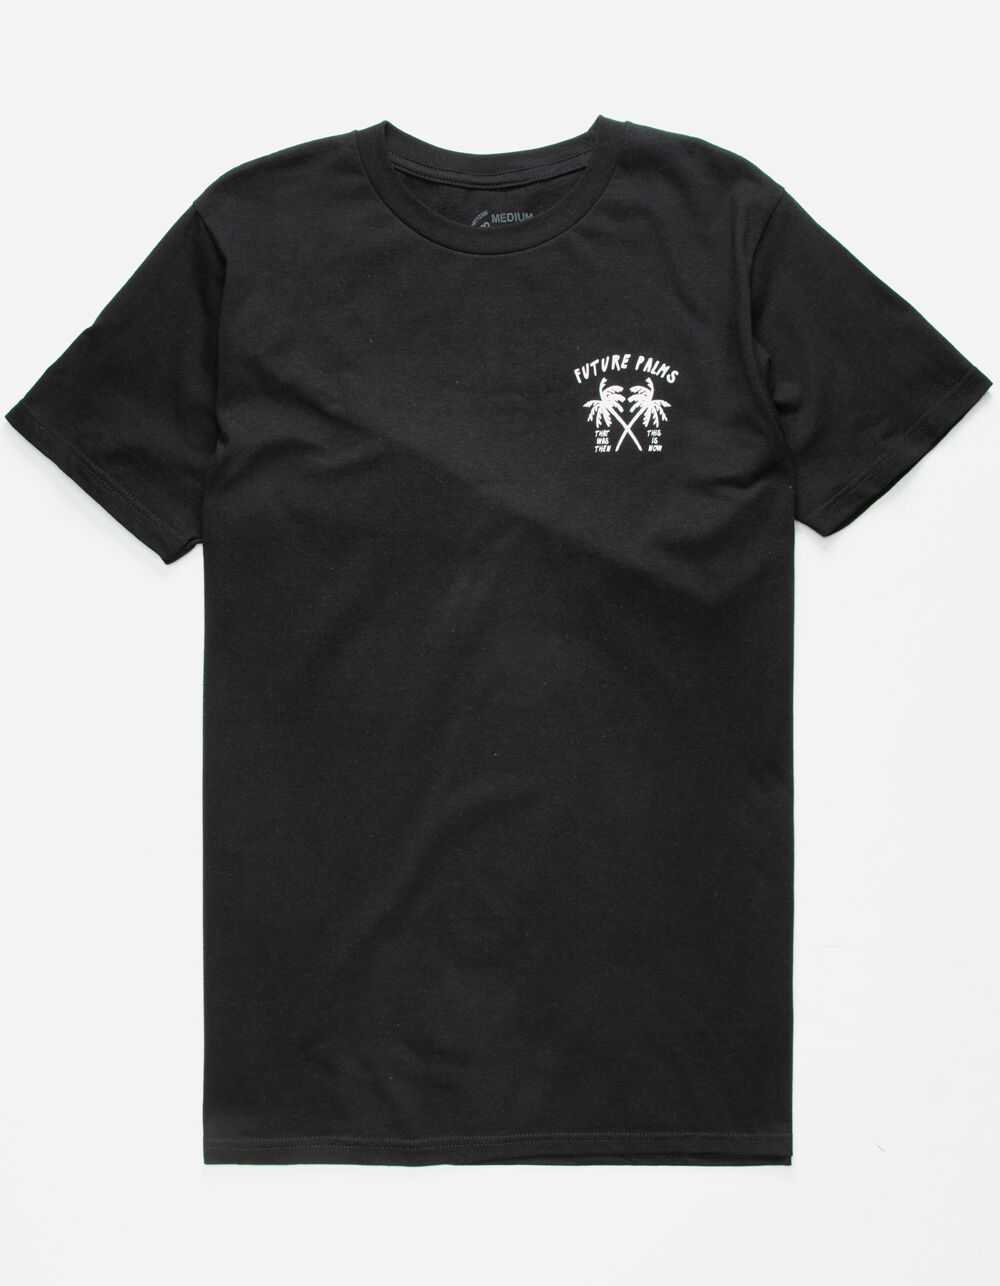 FUTURE PALMS This Is Now Mens T-Shirt - BLACK | Tillys